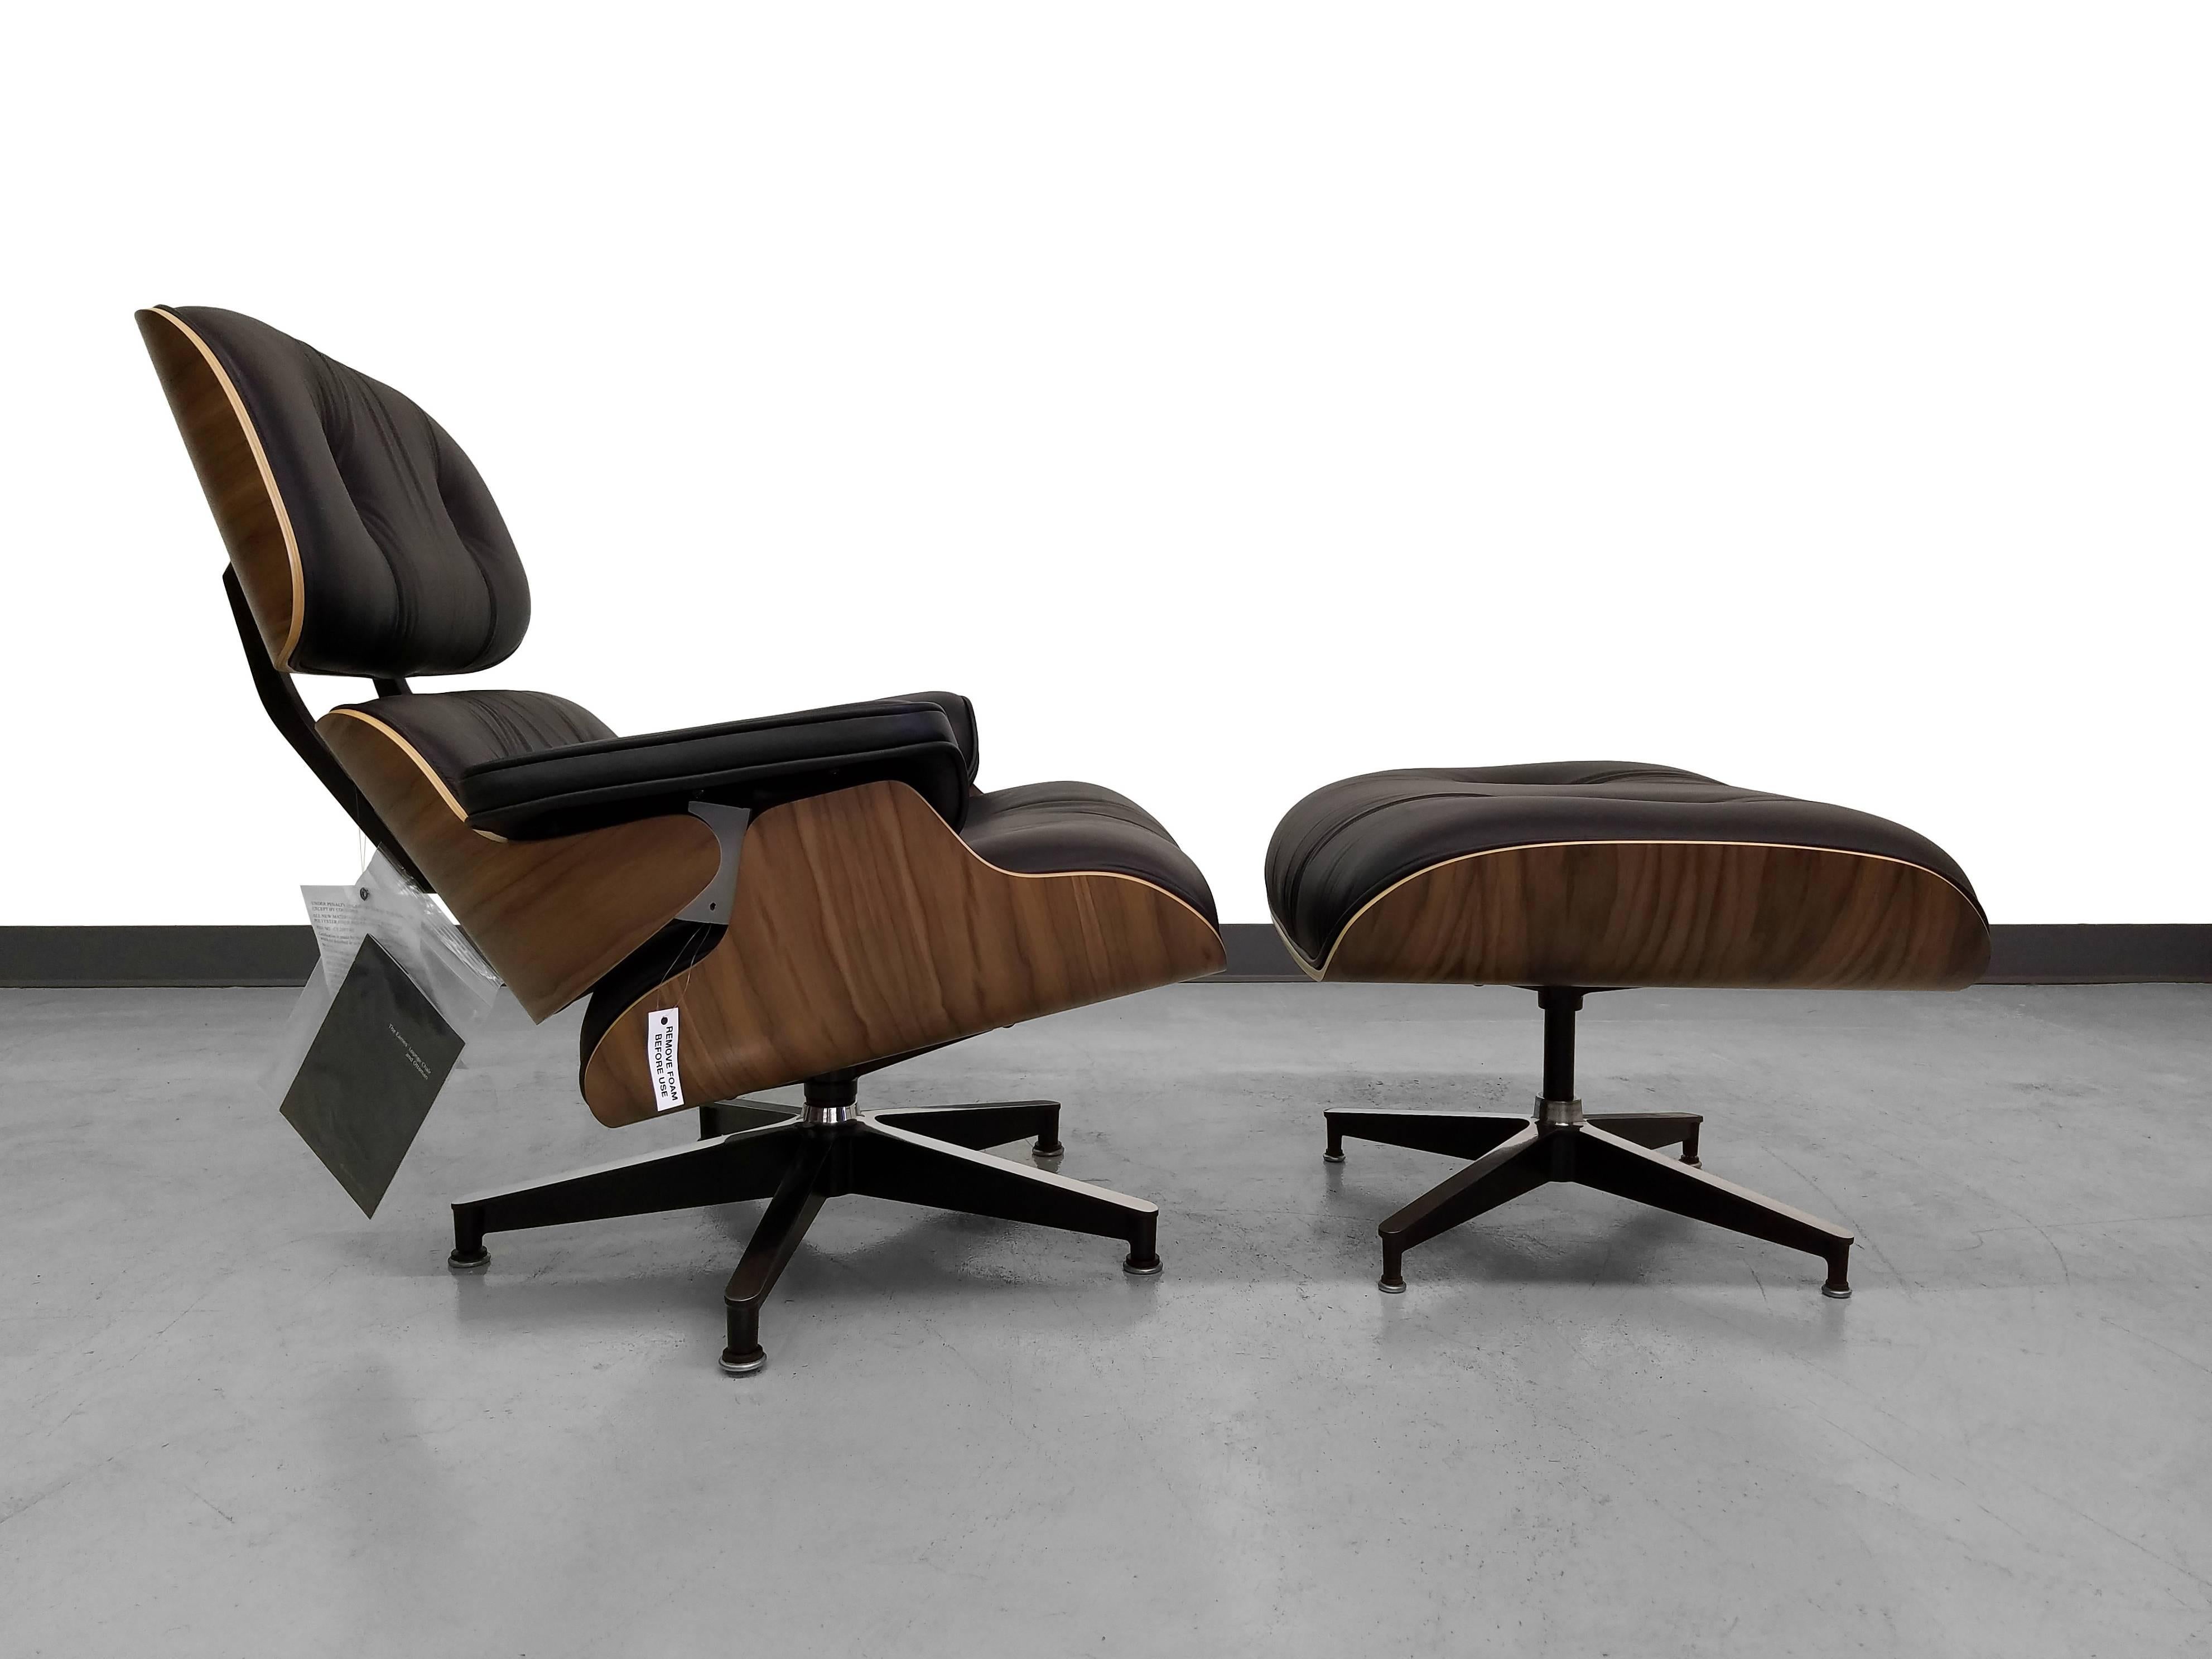 Brand new with tags, authentic Herman Miller Eames lounge chair. Walnut finish. Mint condition. Dated July 2015.